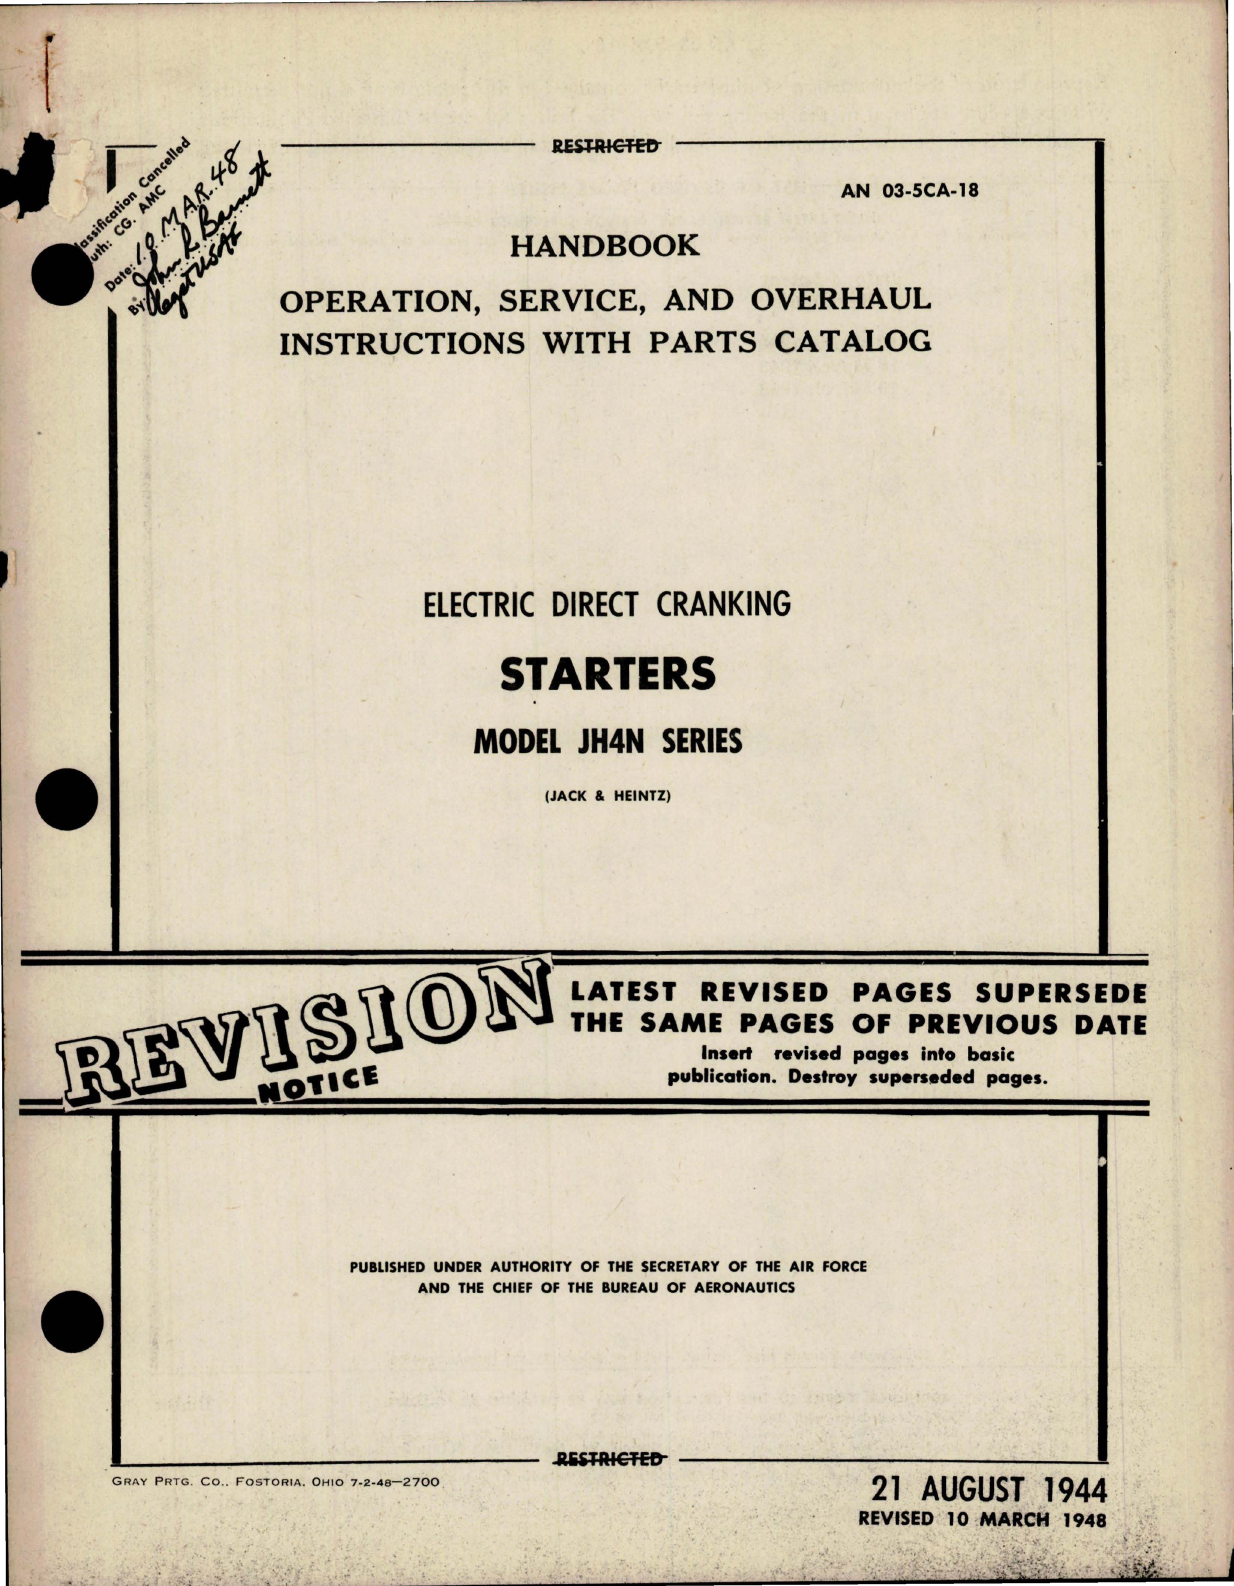 Sample page 1 from AirCorps Library document: Operation, Service and Overhaul Instructions with Parts for Electric Direct Cranking Starters - Model JH4N Series